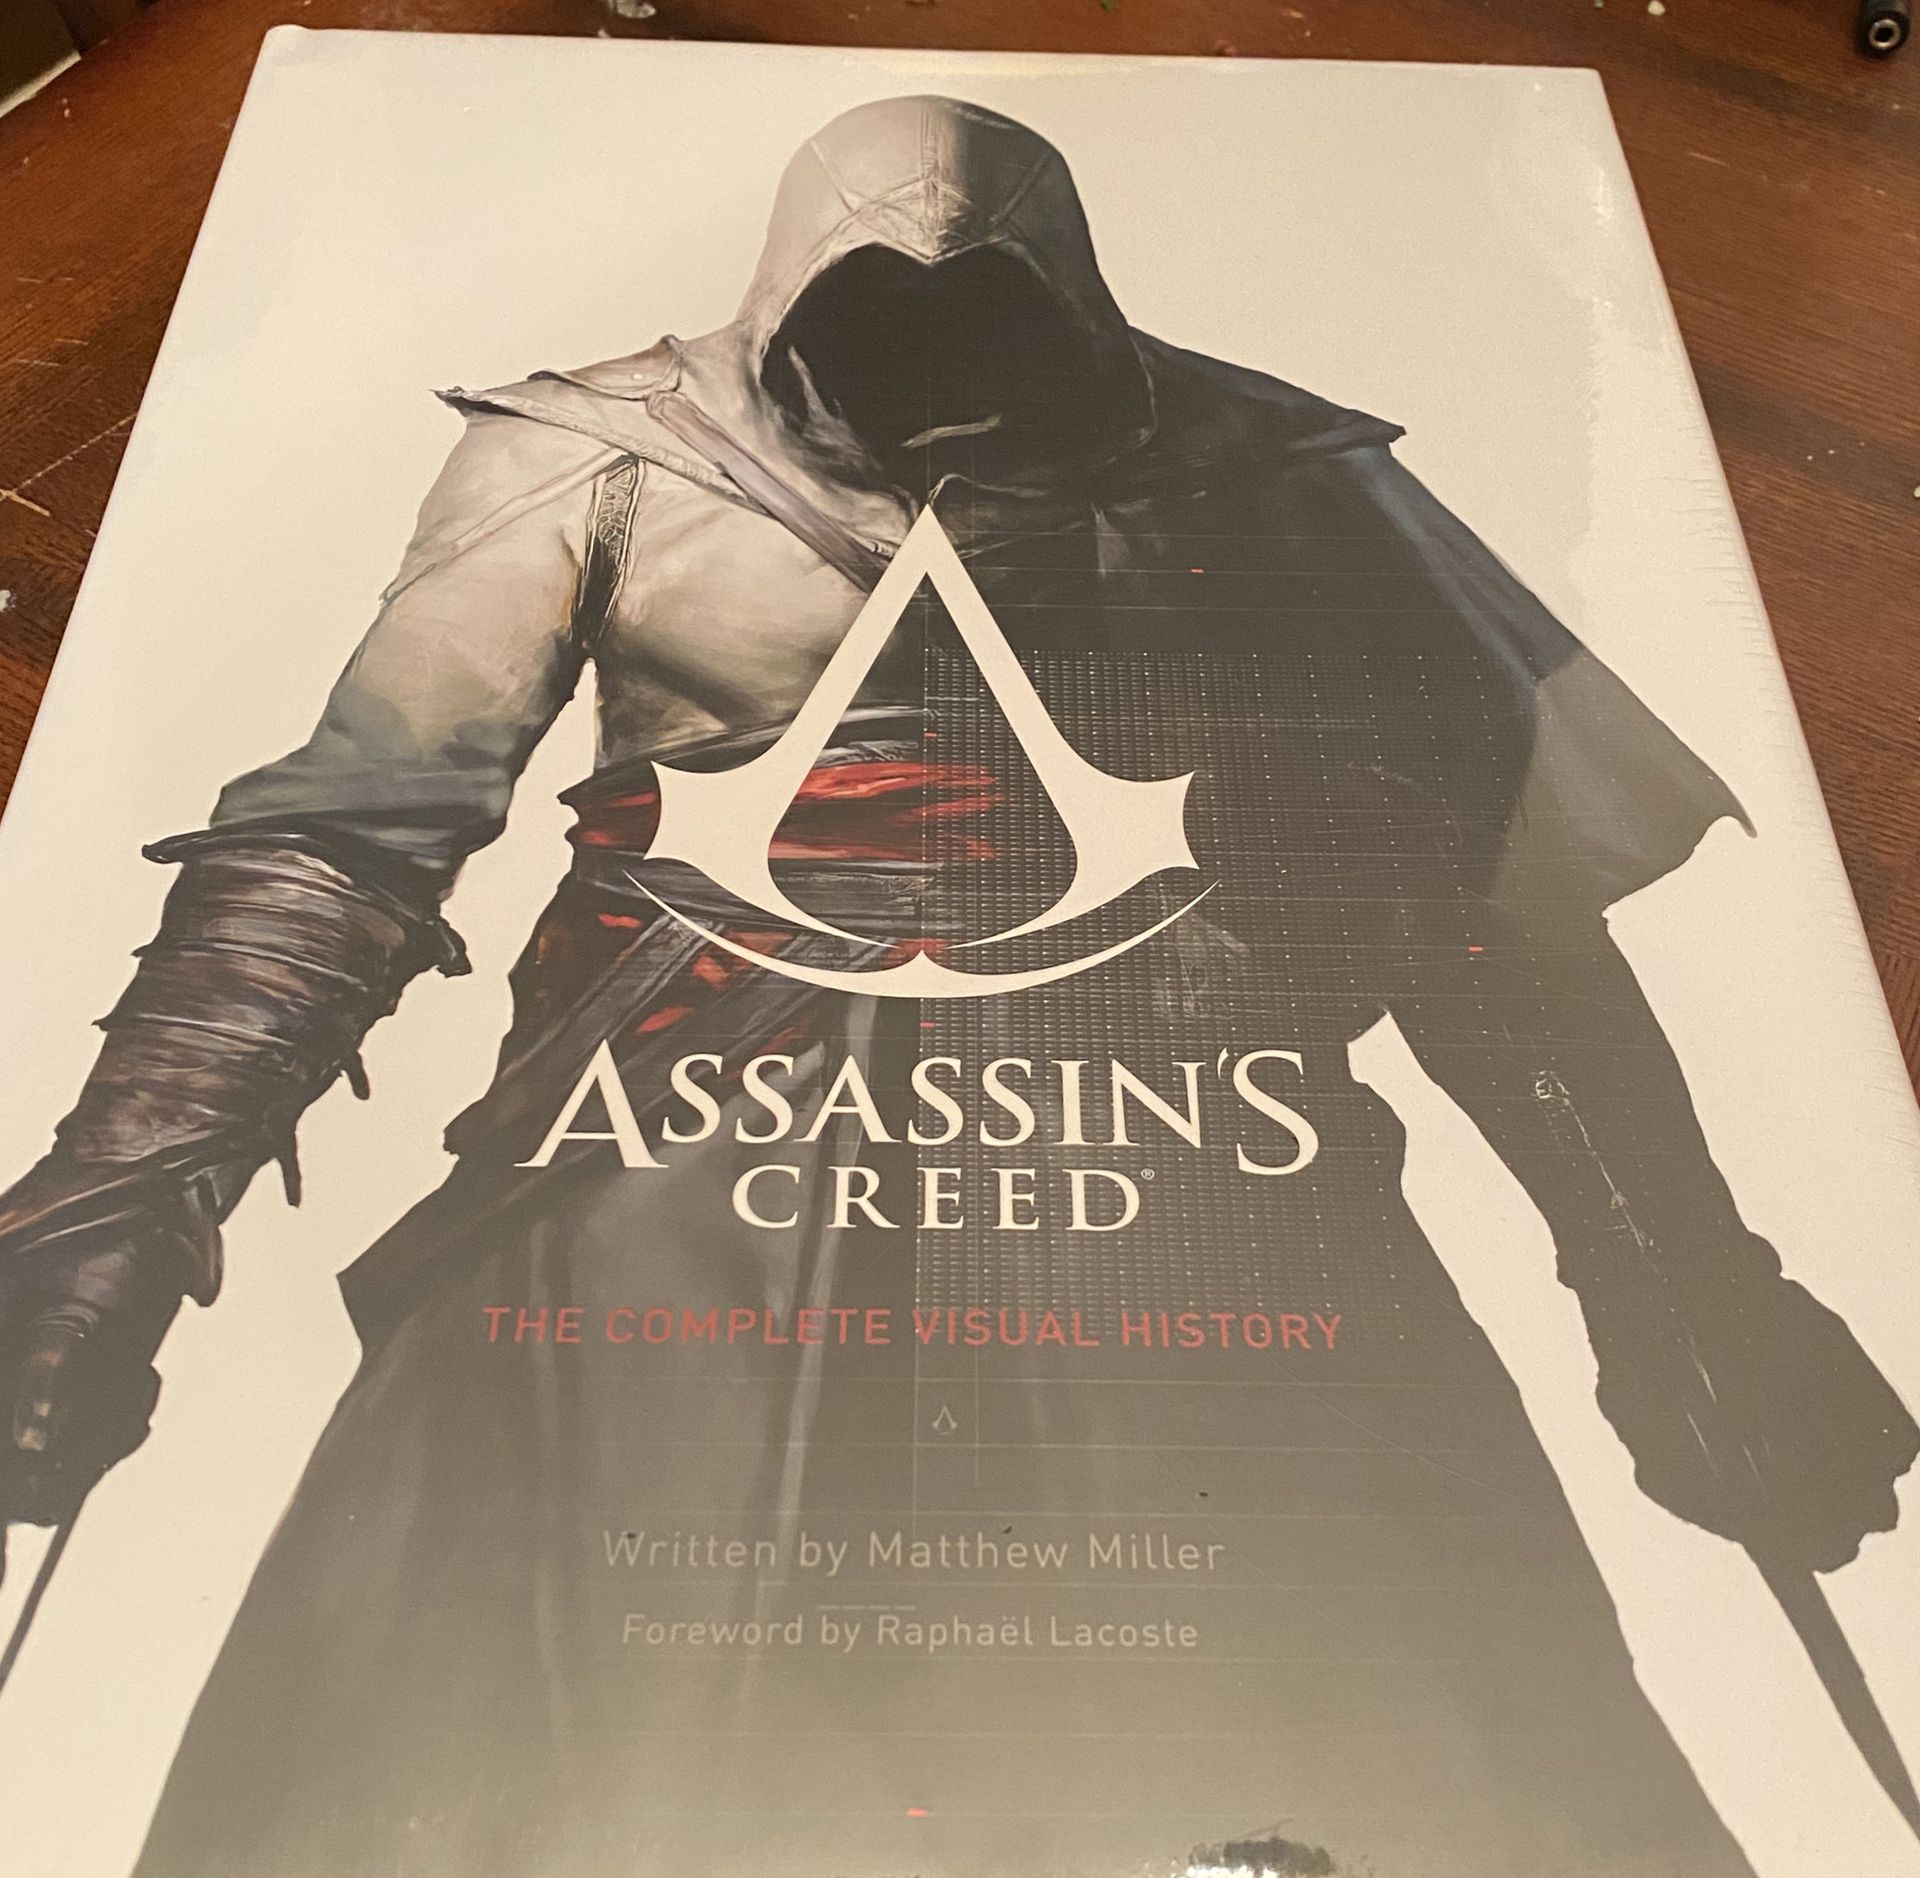 Assassin’s Creed - the Complete Visual History by Matthew Miller